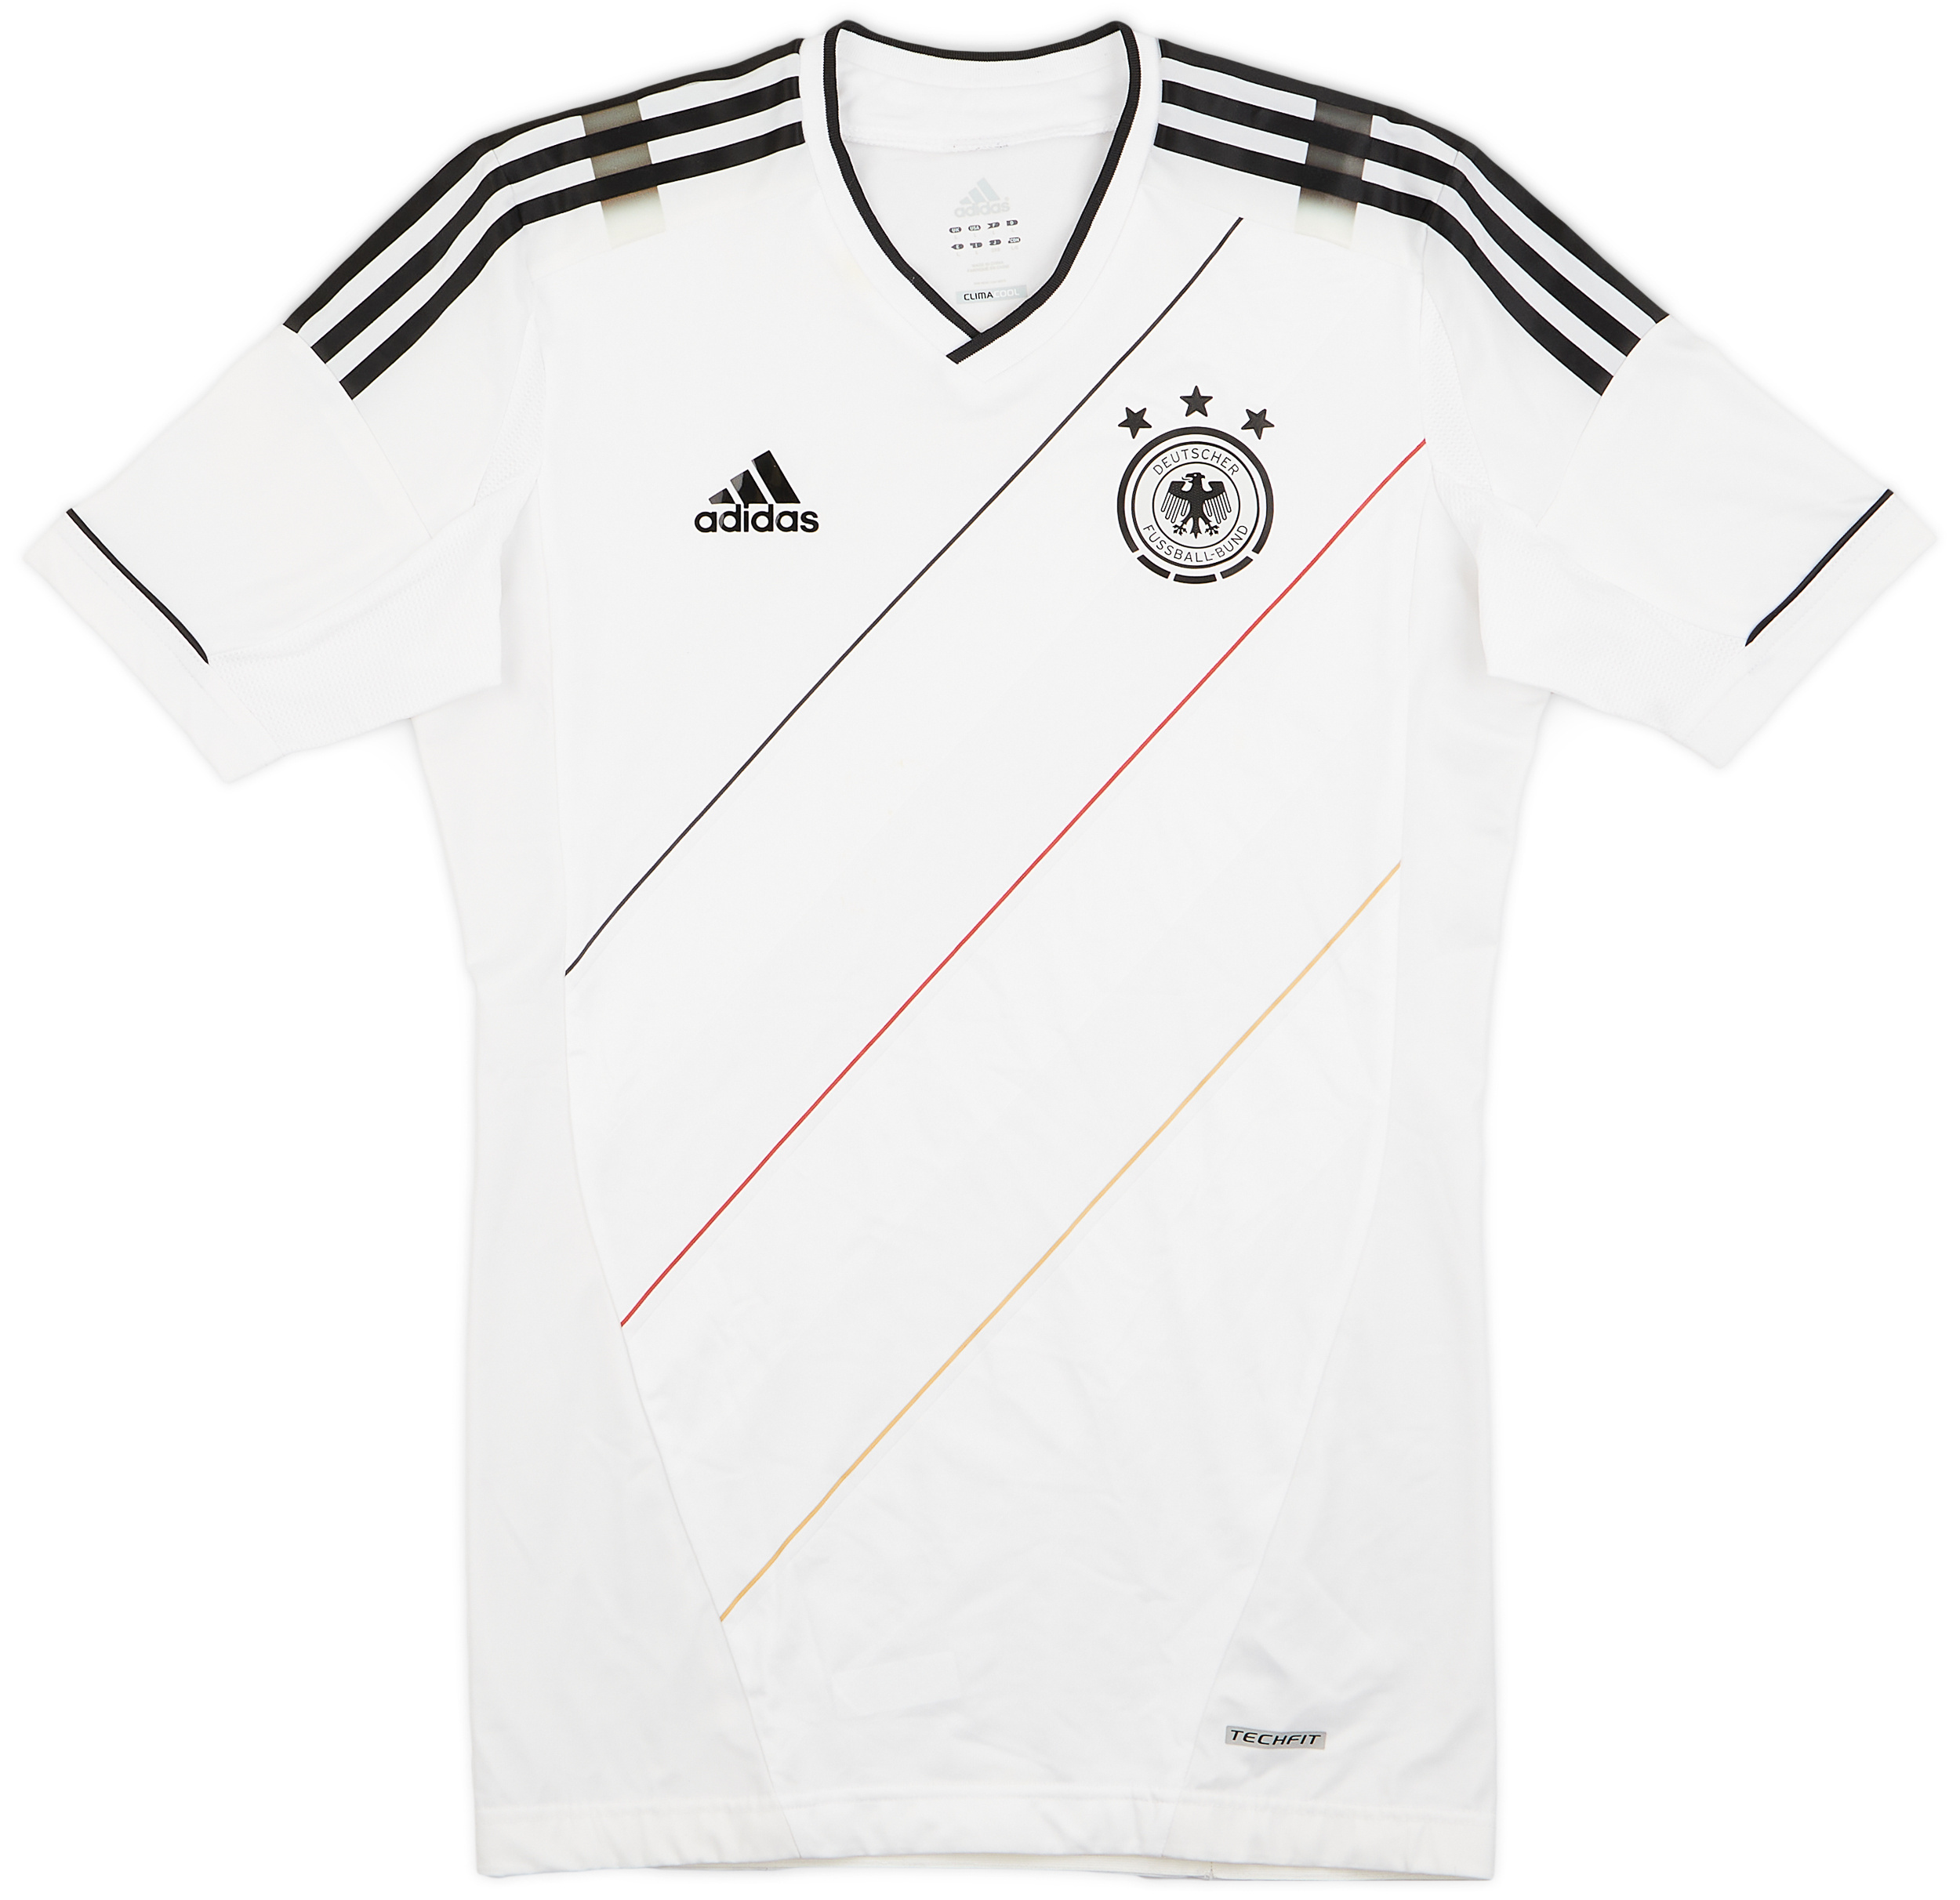 2012-13 Germany Authentic Home Shirt - 7/10 - ()